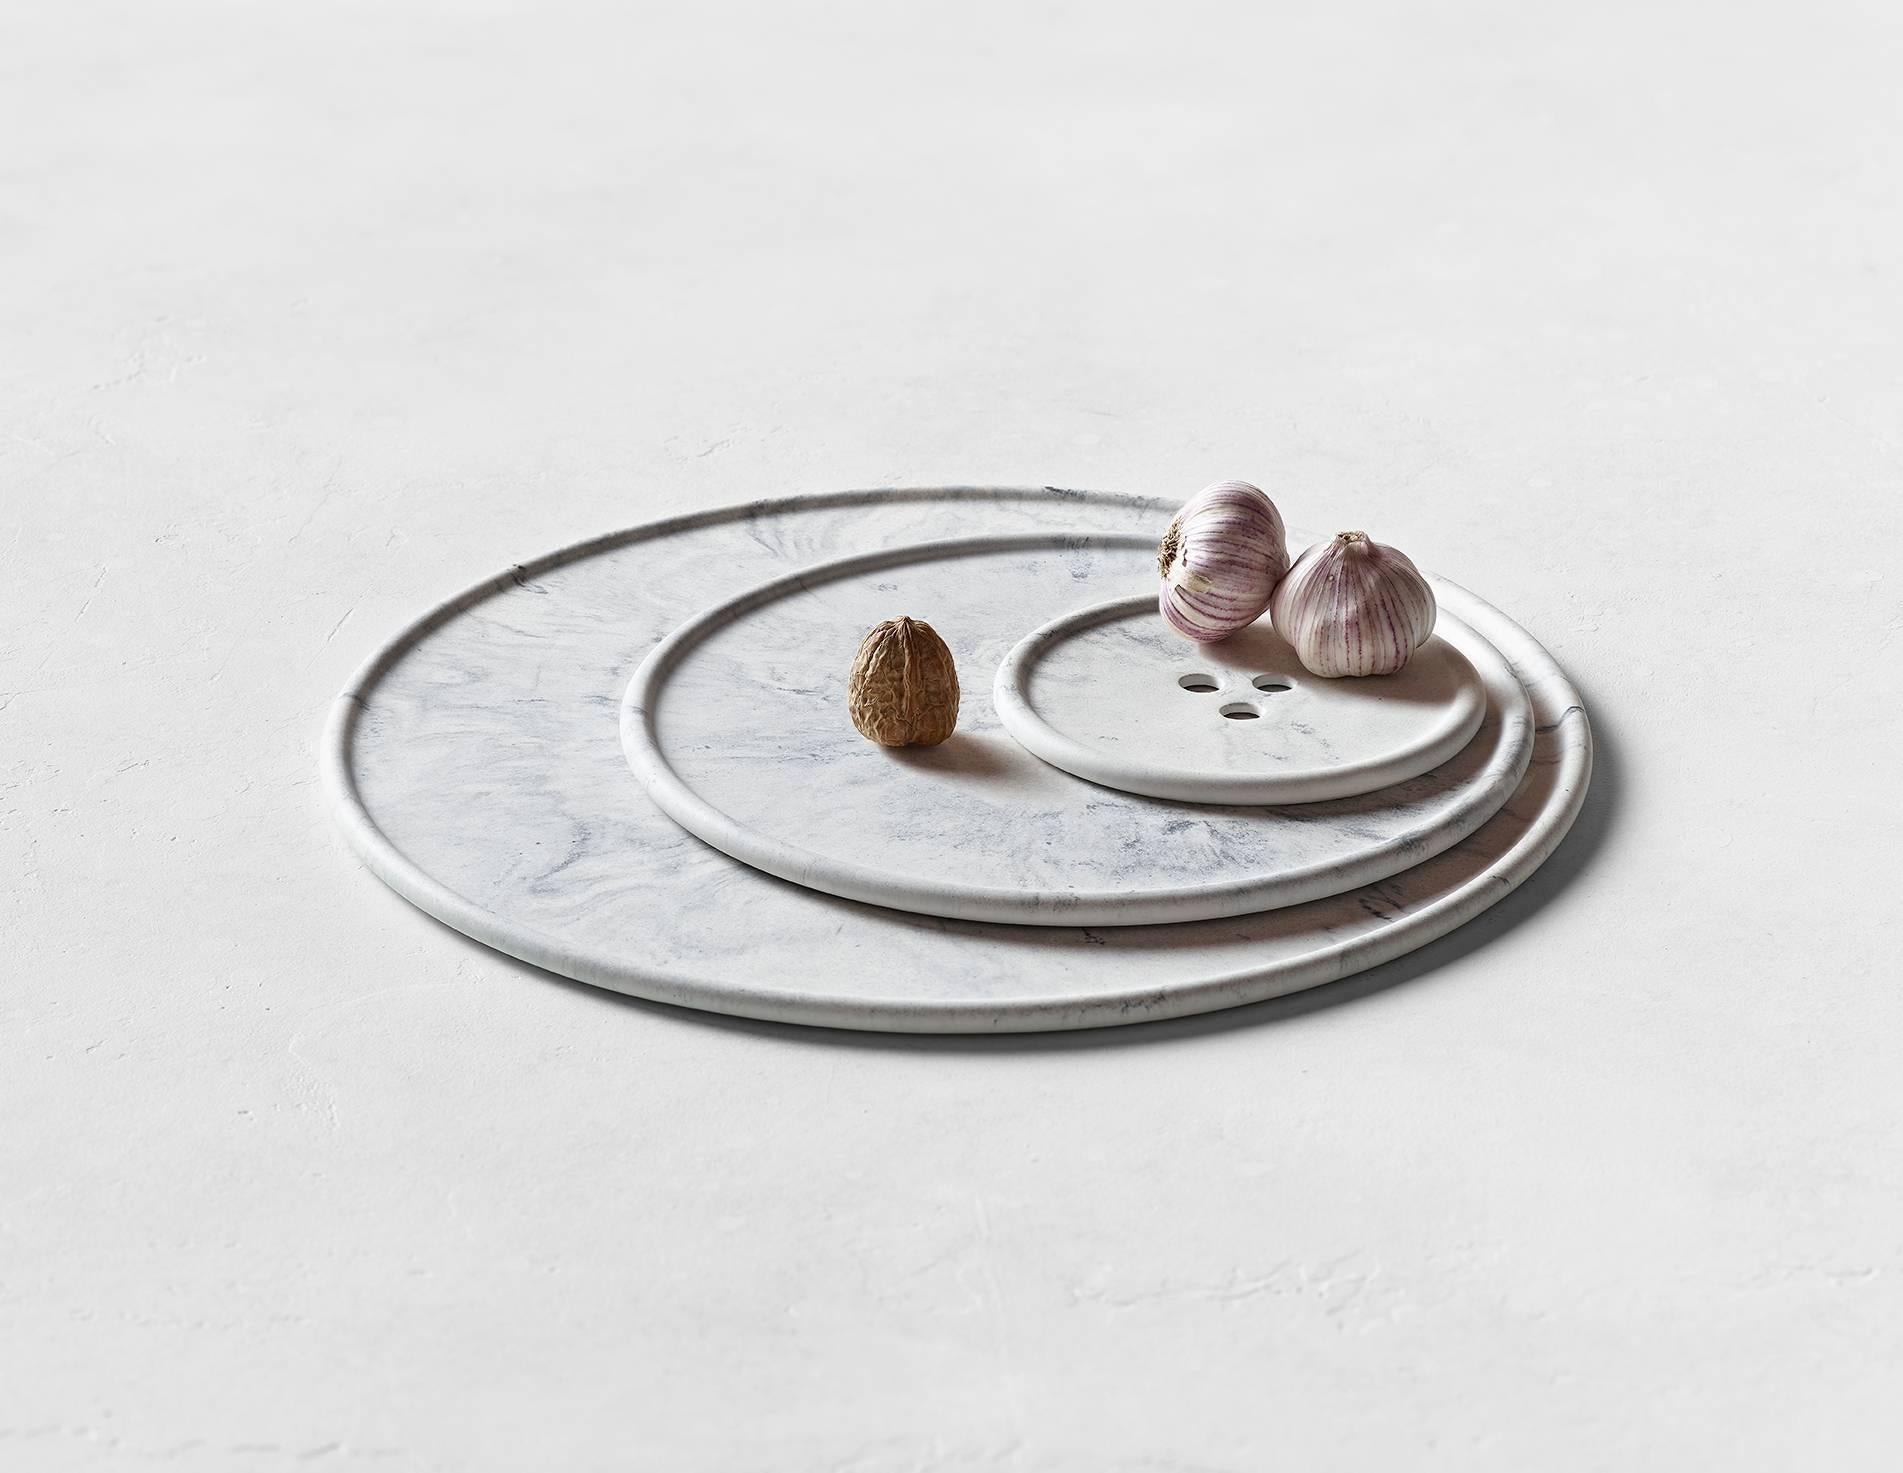 Cast in one pour, this dish is formed like a button to showcase your everyday favorites. Hand-mixed with different minerals and natural pigments, the Bouton carries subtle textures on its surface. As the concrete settles uniquely for each pour, no